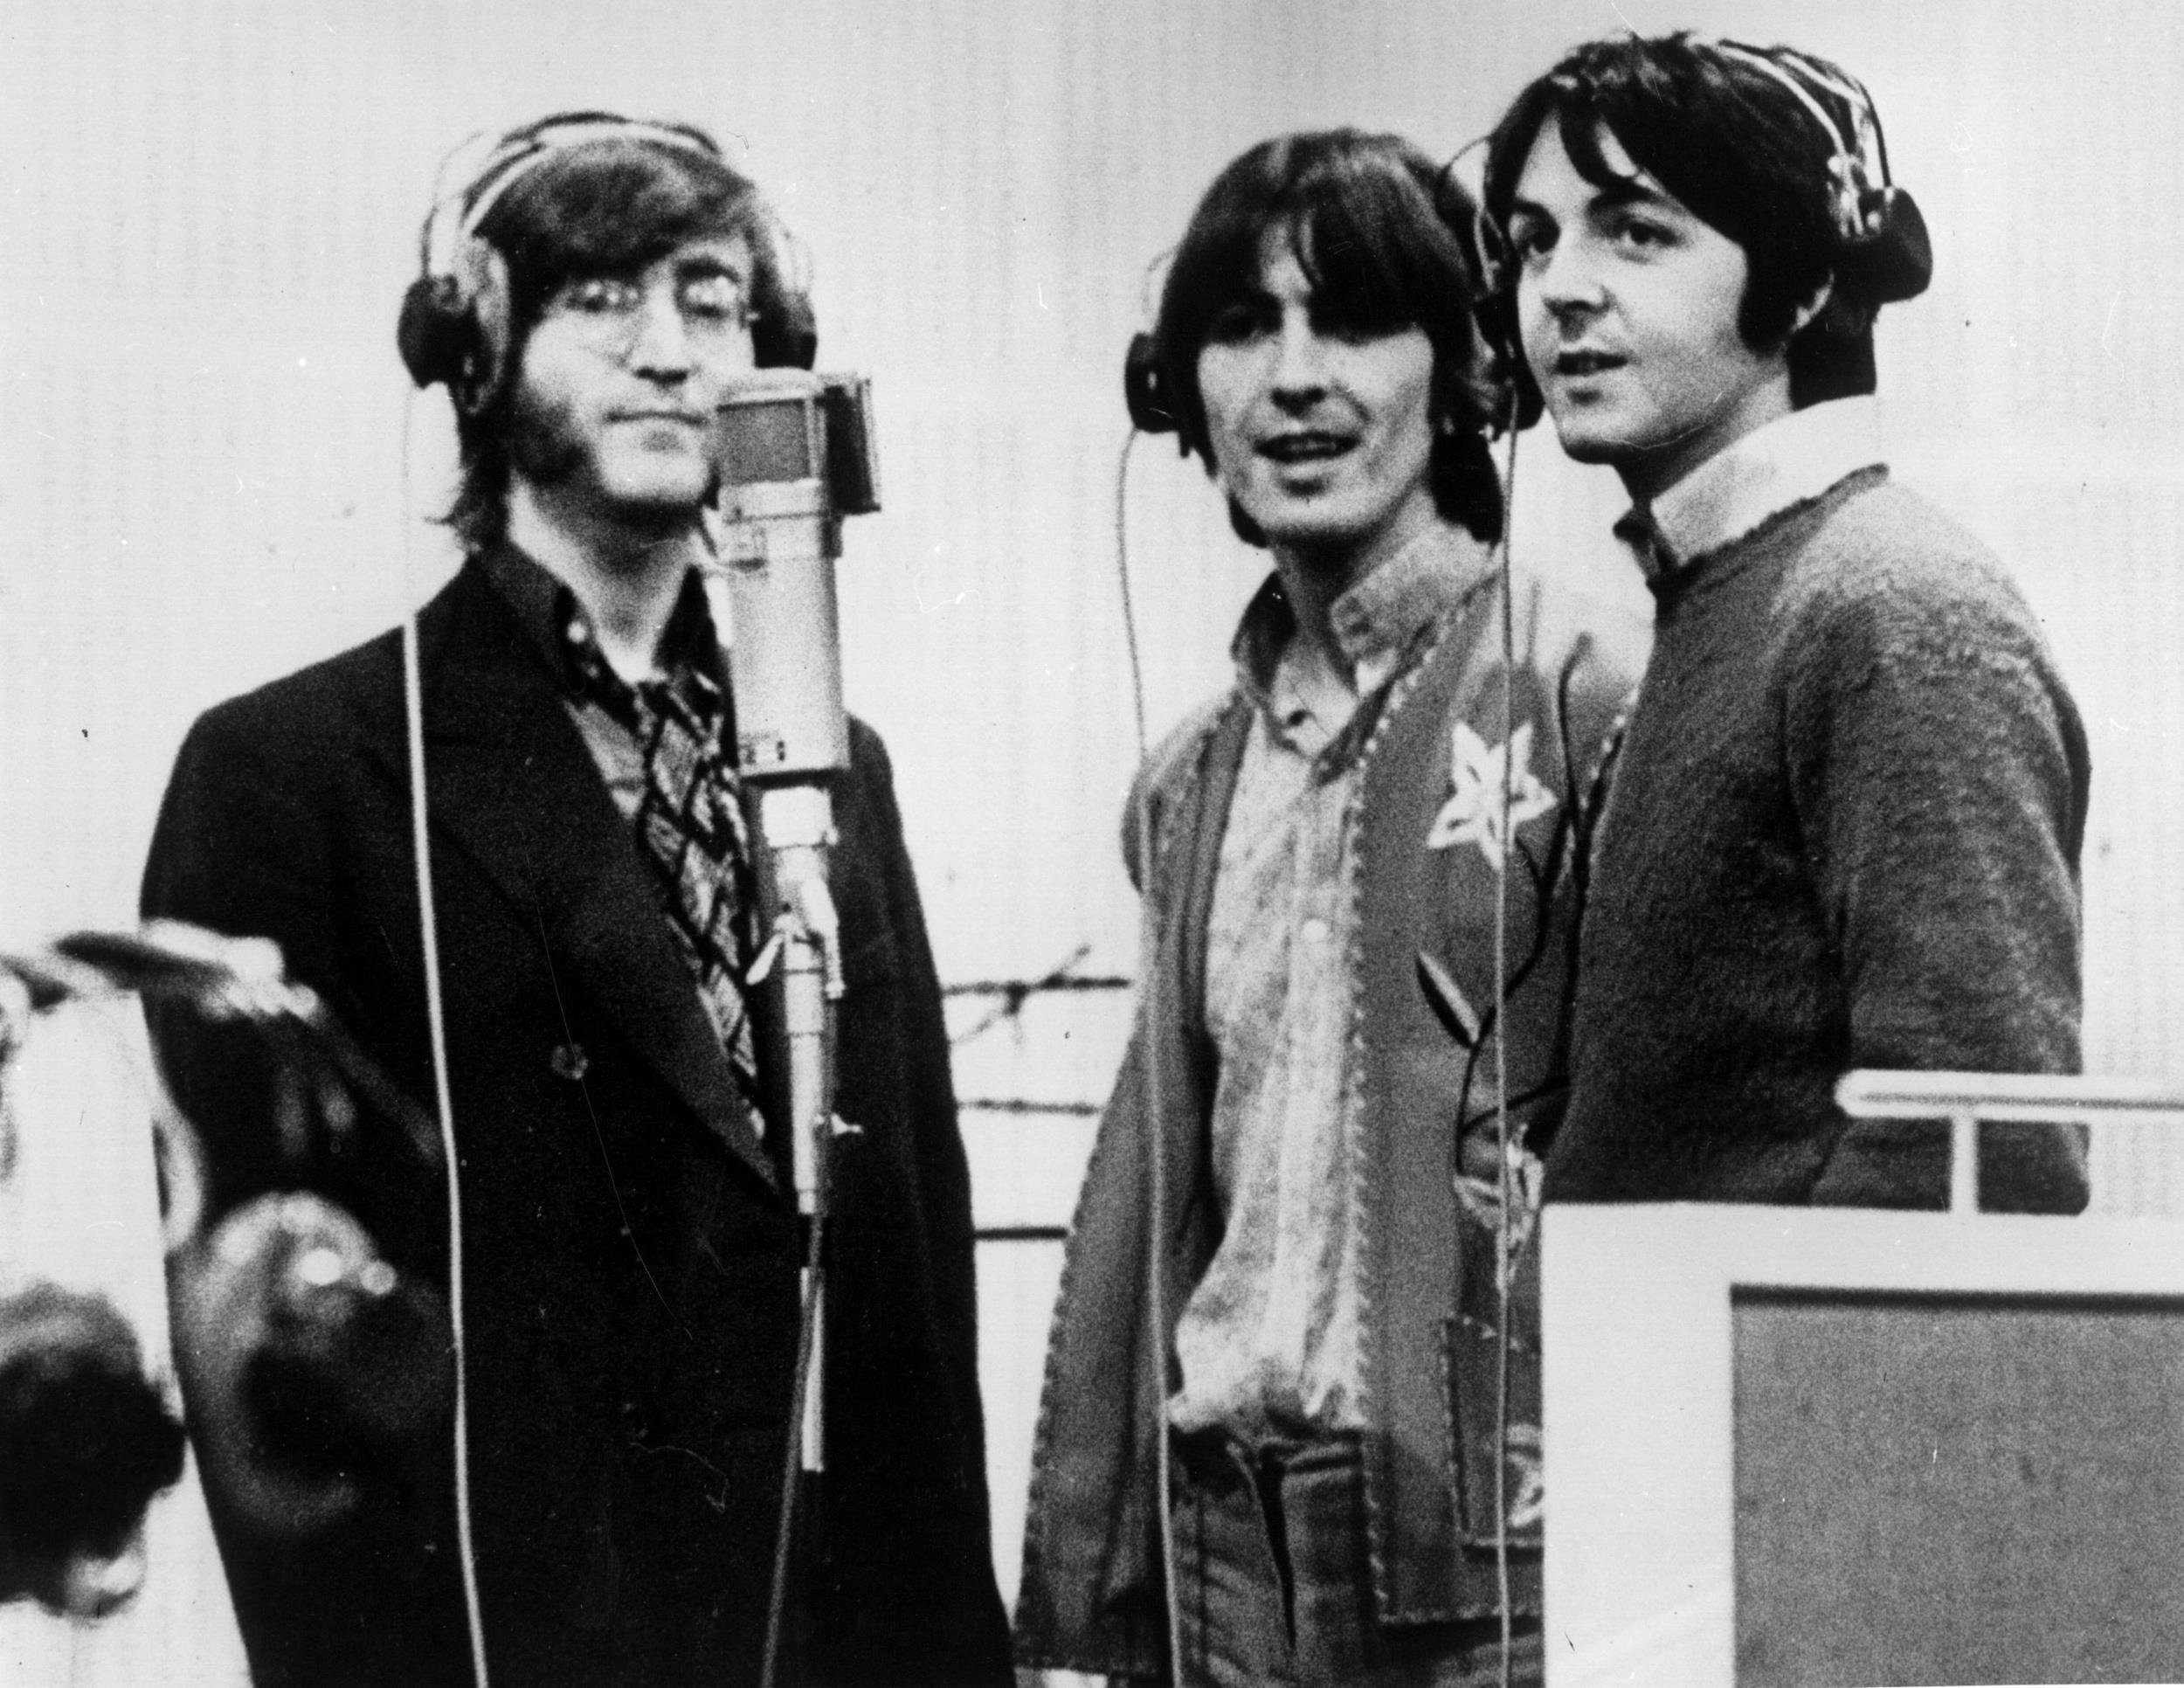 <p>The opening track of The Beatles’ “White Album” is a McCartney-penned parody of Chuck Berry’s “Back in the U.S.A.” and, in its bridge, The Beach Boys’ “California Girls." Though written in the midst of the Cold War, the song is far from political and gets away with its groaner jokes because it flat out rocks. It’s one of the greatest novelty songs ever recorded. </p><p>You may also like: <a href='https://www.yardbarker.com/entertainment/articles/the_25_best_films_set_in_las_vegas/s1__37675688'>The 25 best films set in Las Vegas</a></p>